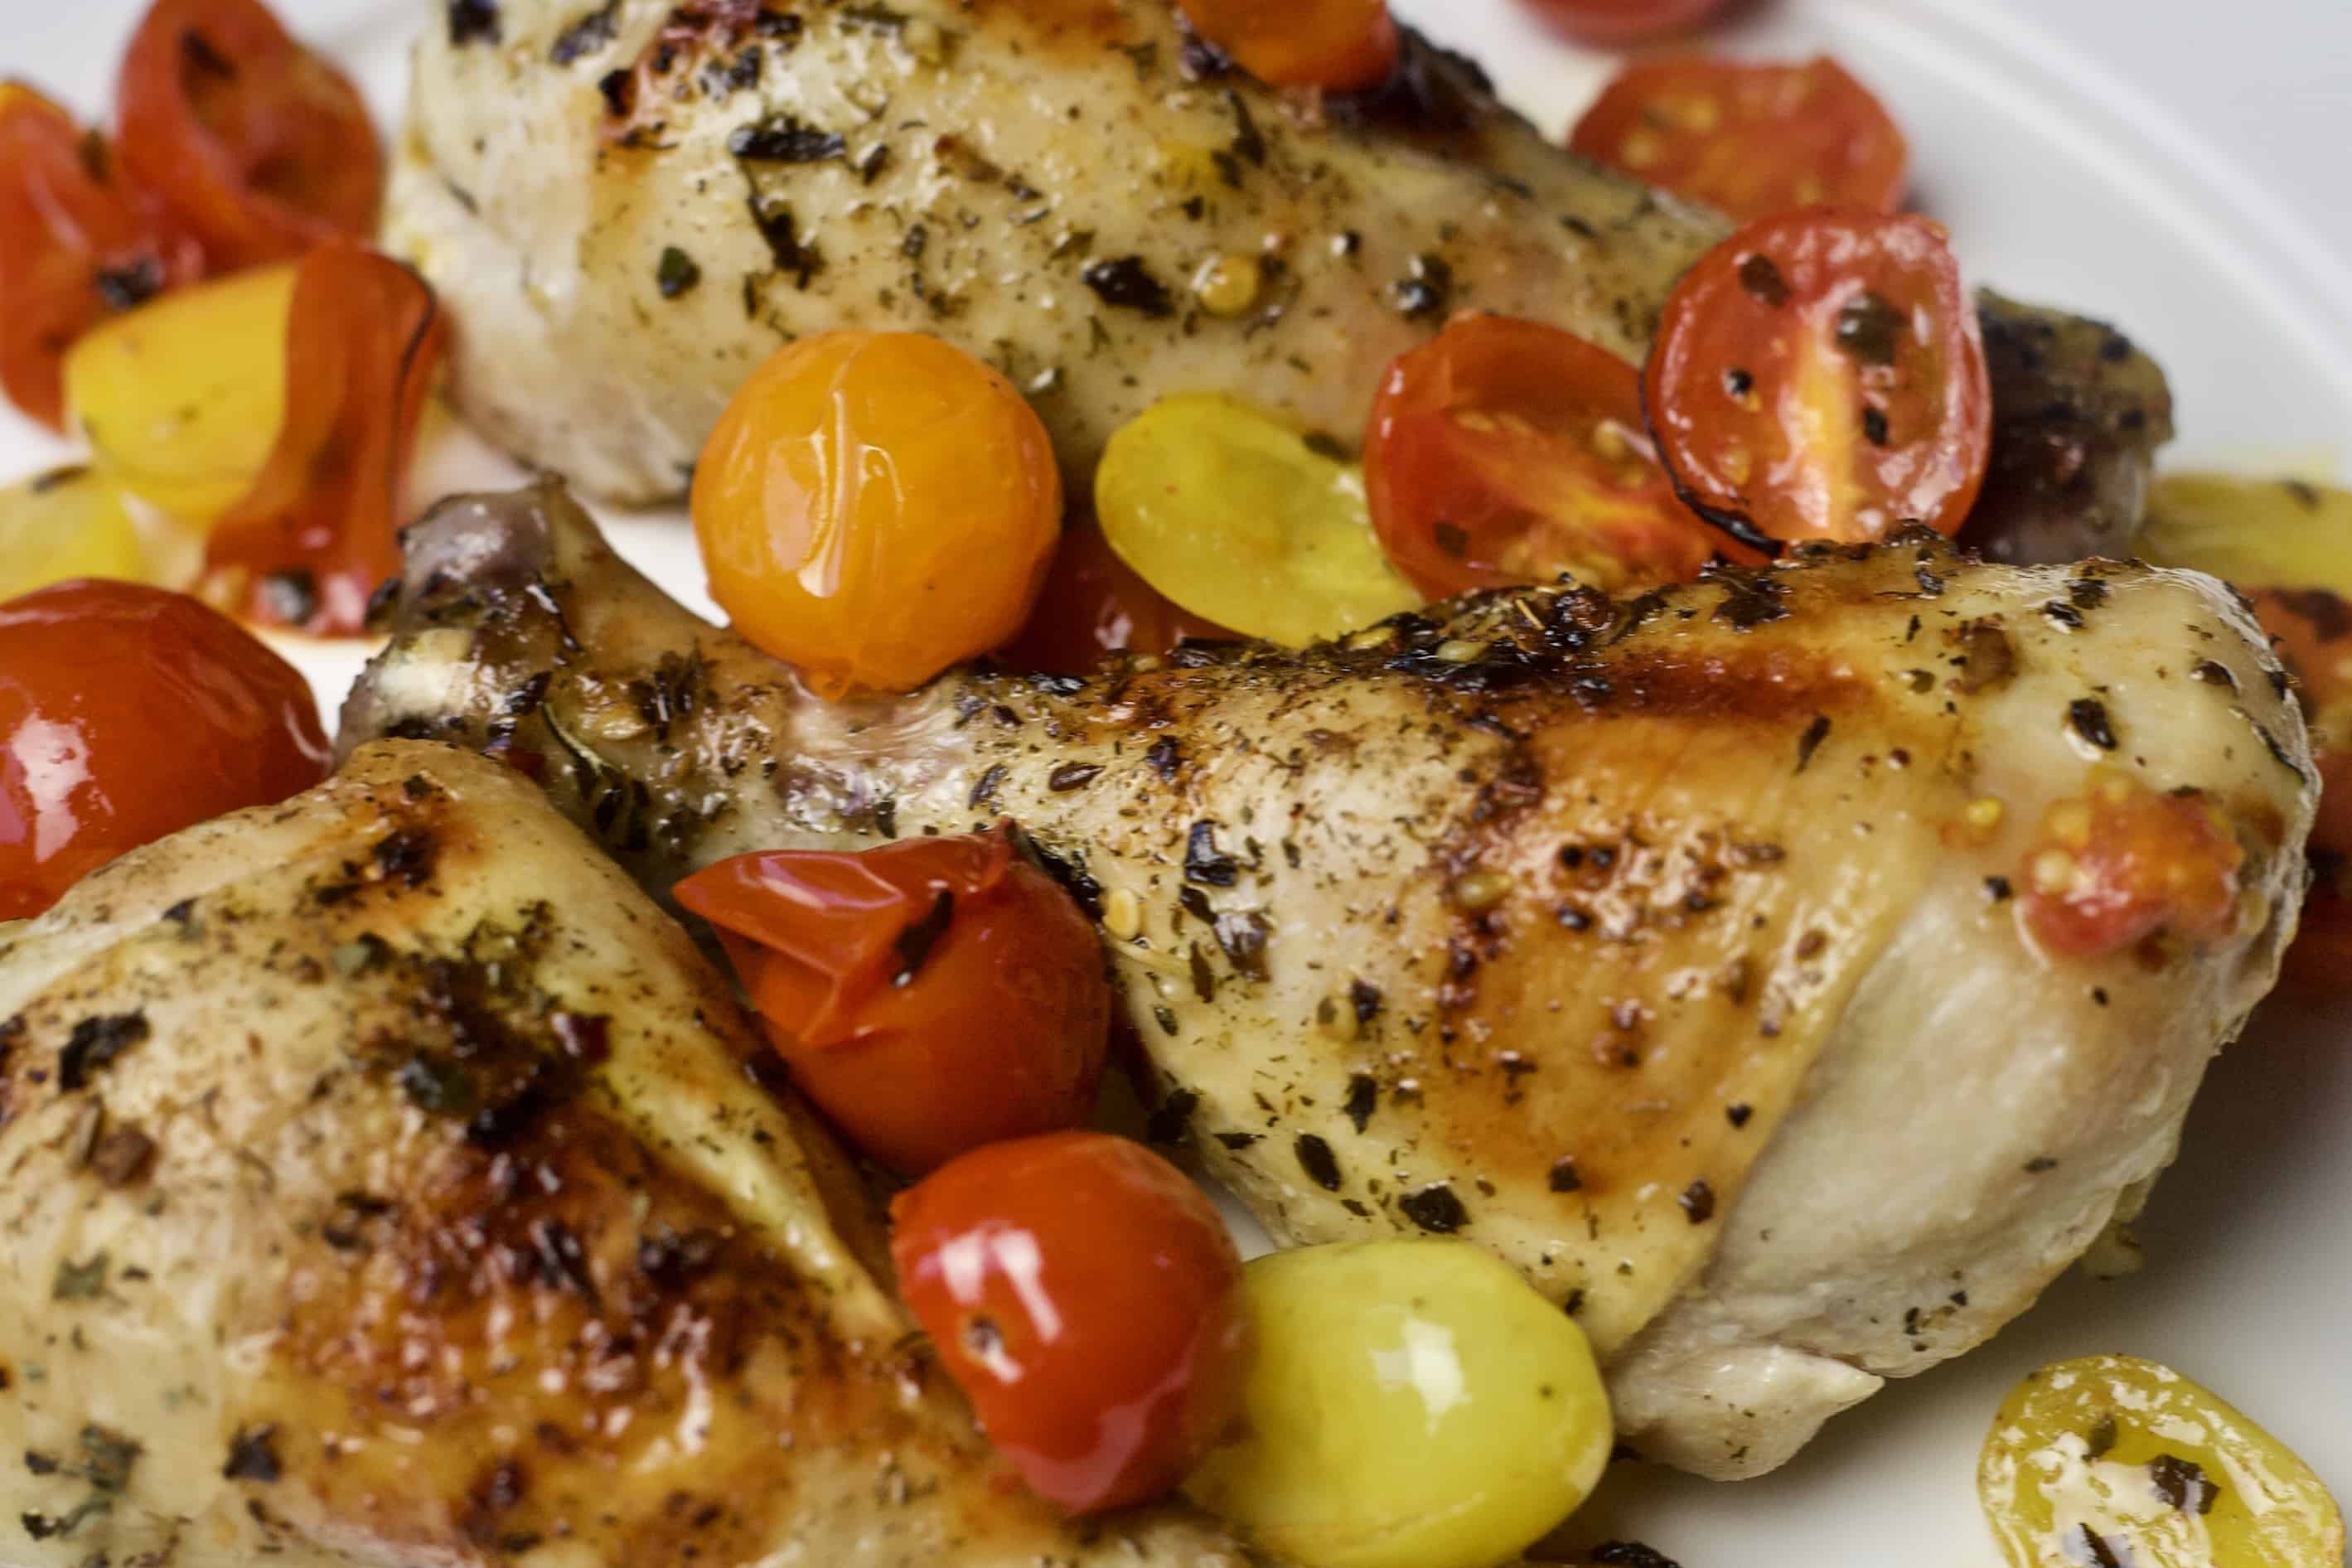 Garlic & Basil Roasted Chicken with Tomatoes | The Domestic Dietitian